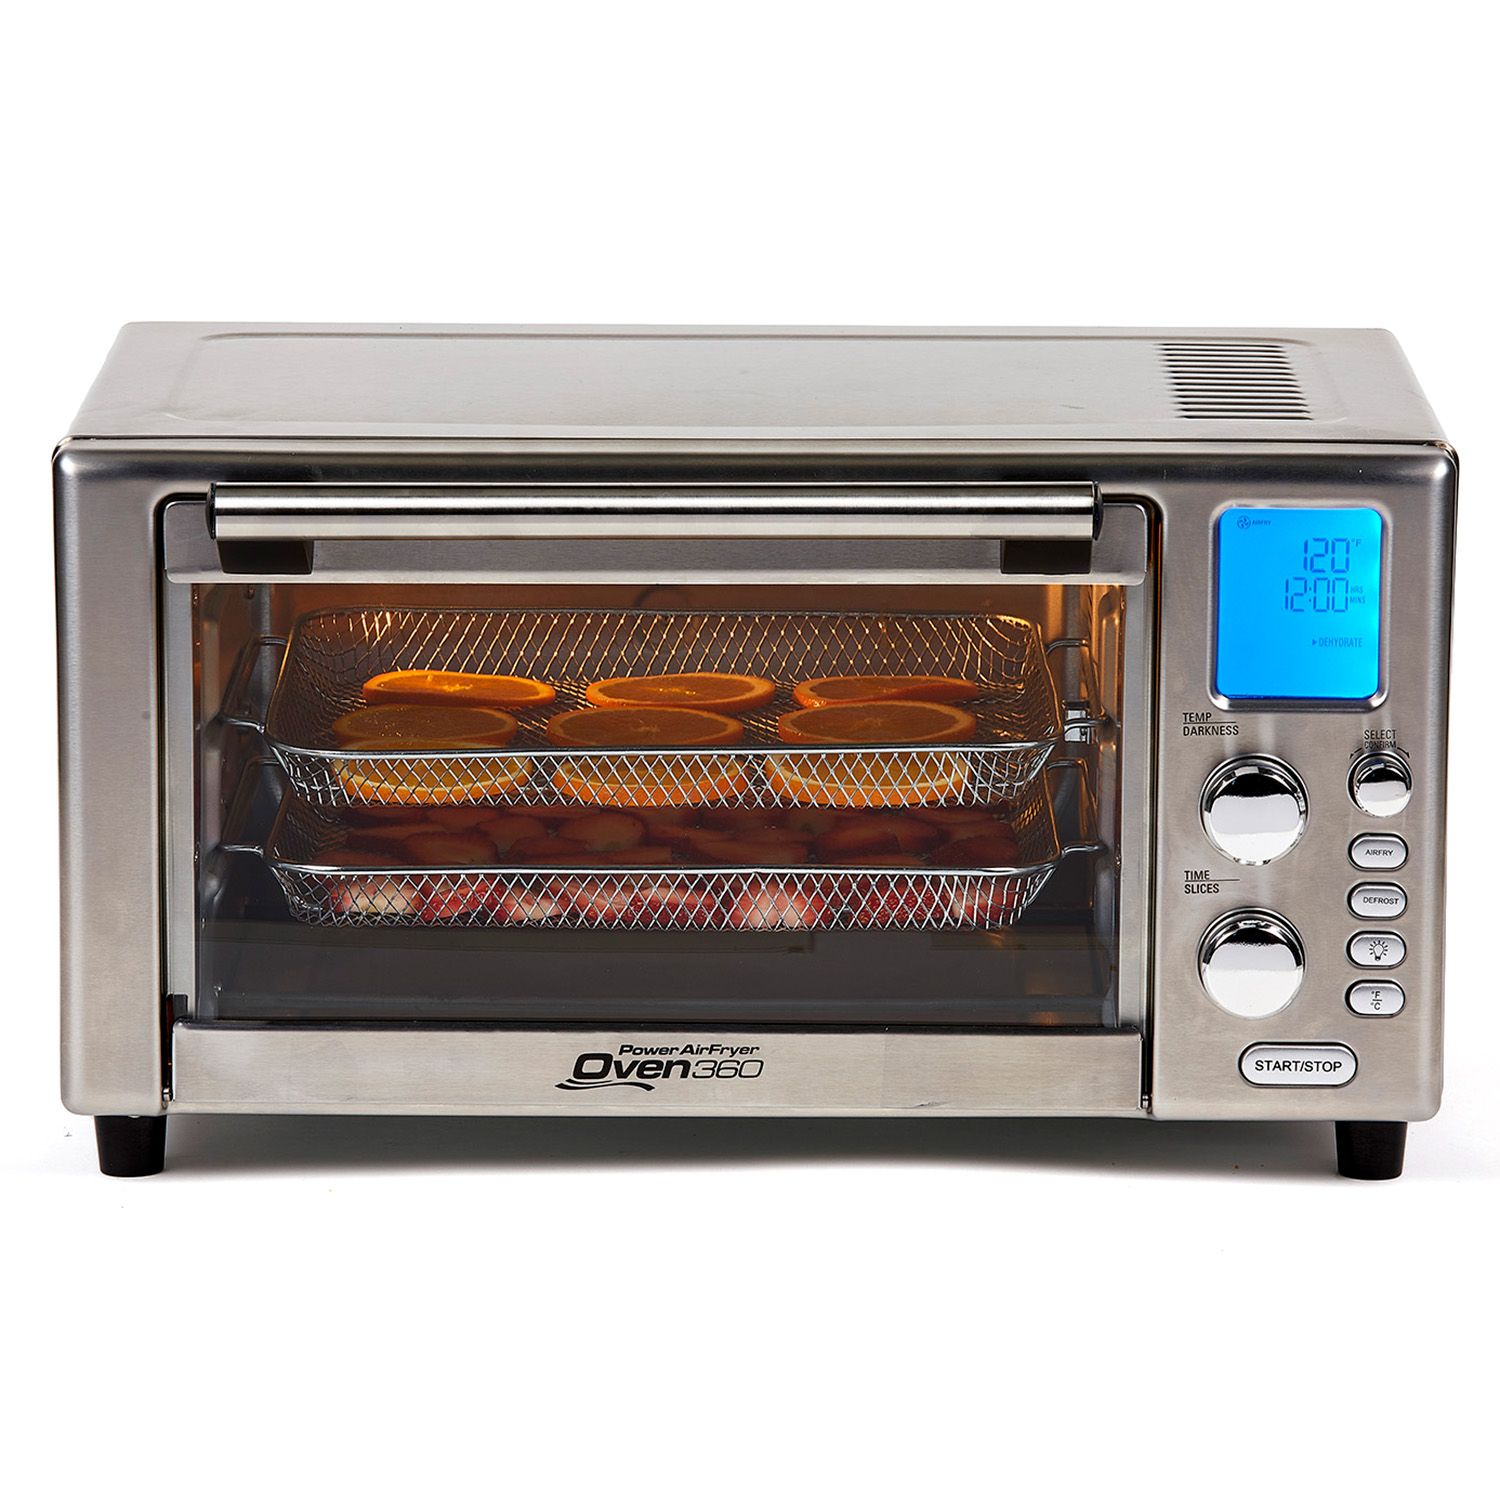 Air Fryer Toaster Oven 360 As Seen on TV